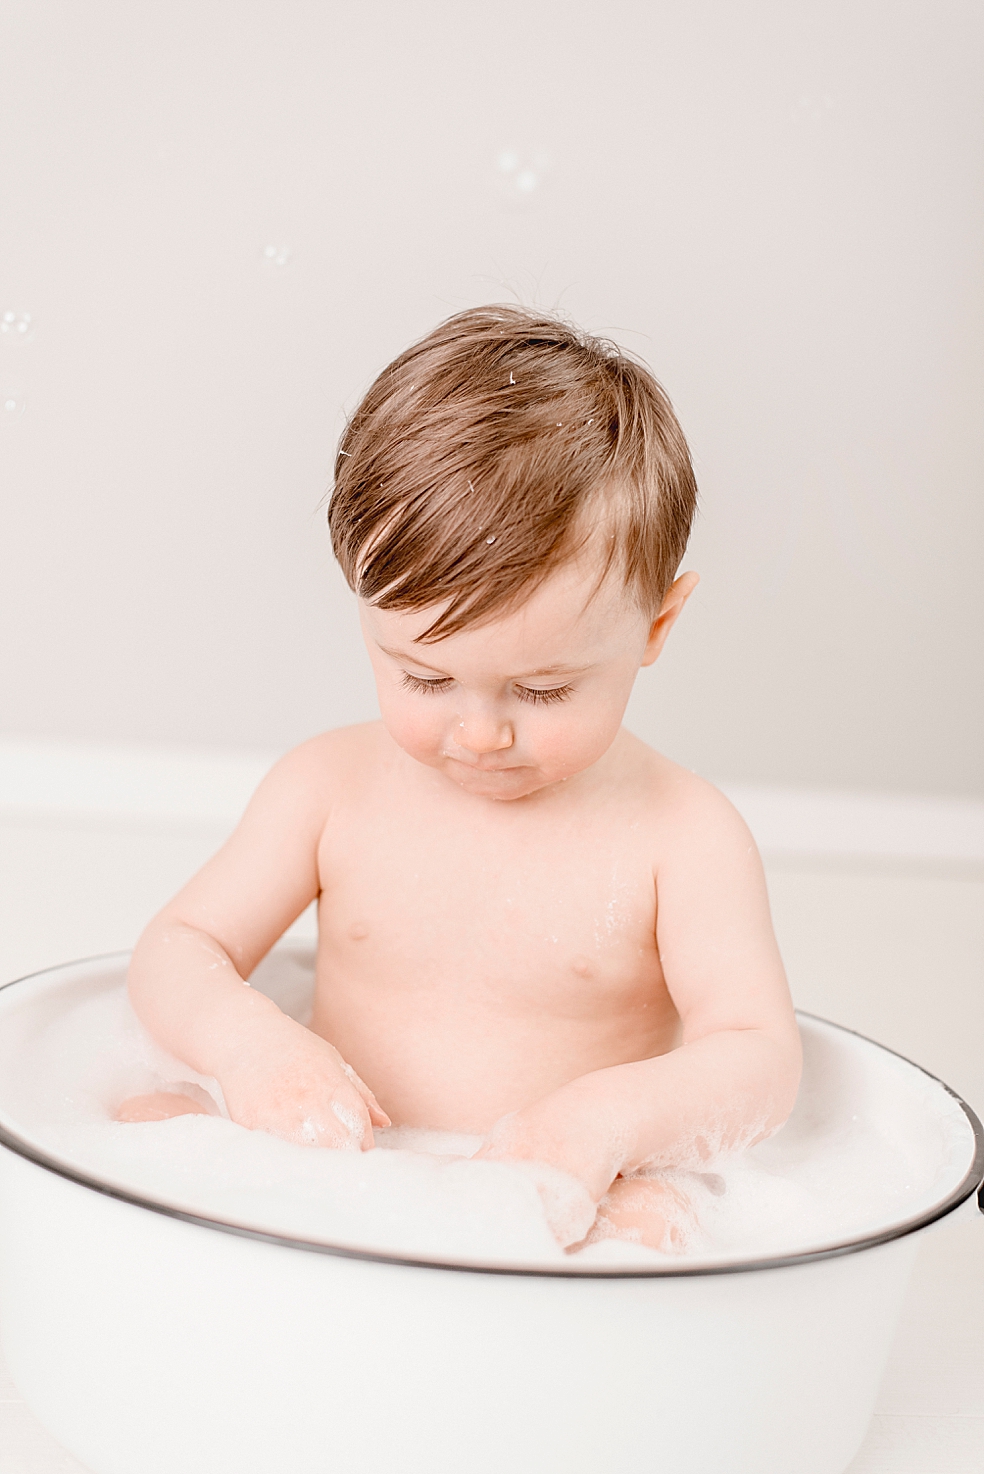 Baby boy in a tub playing with bubbles | Photo by Jessica Lee Photography